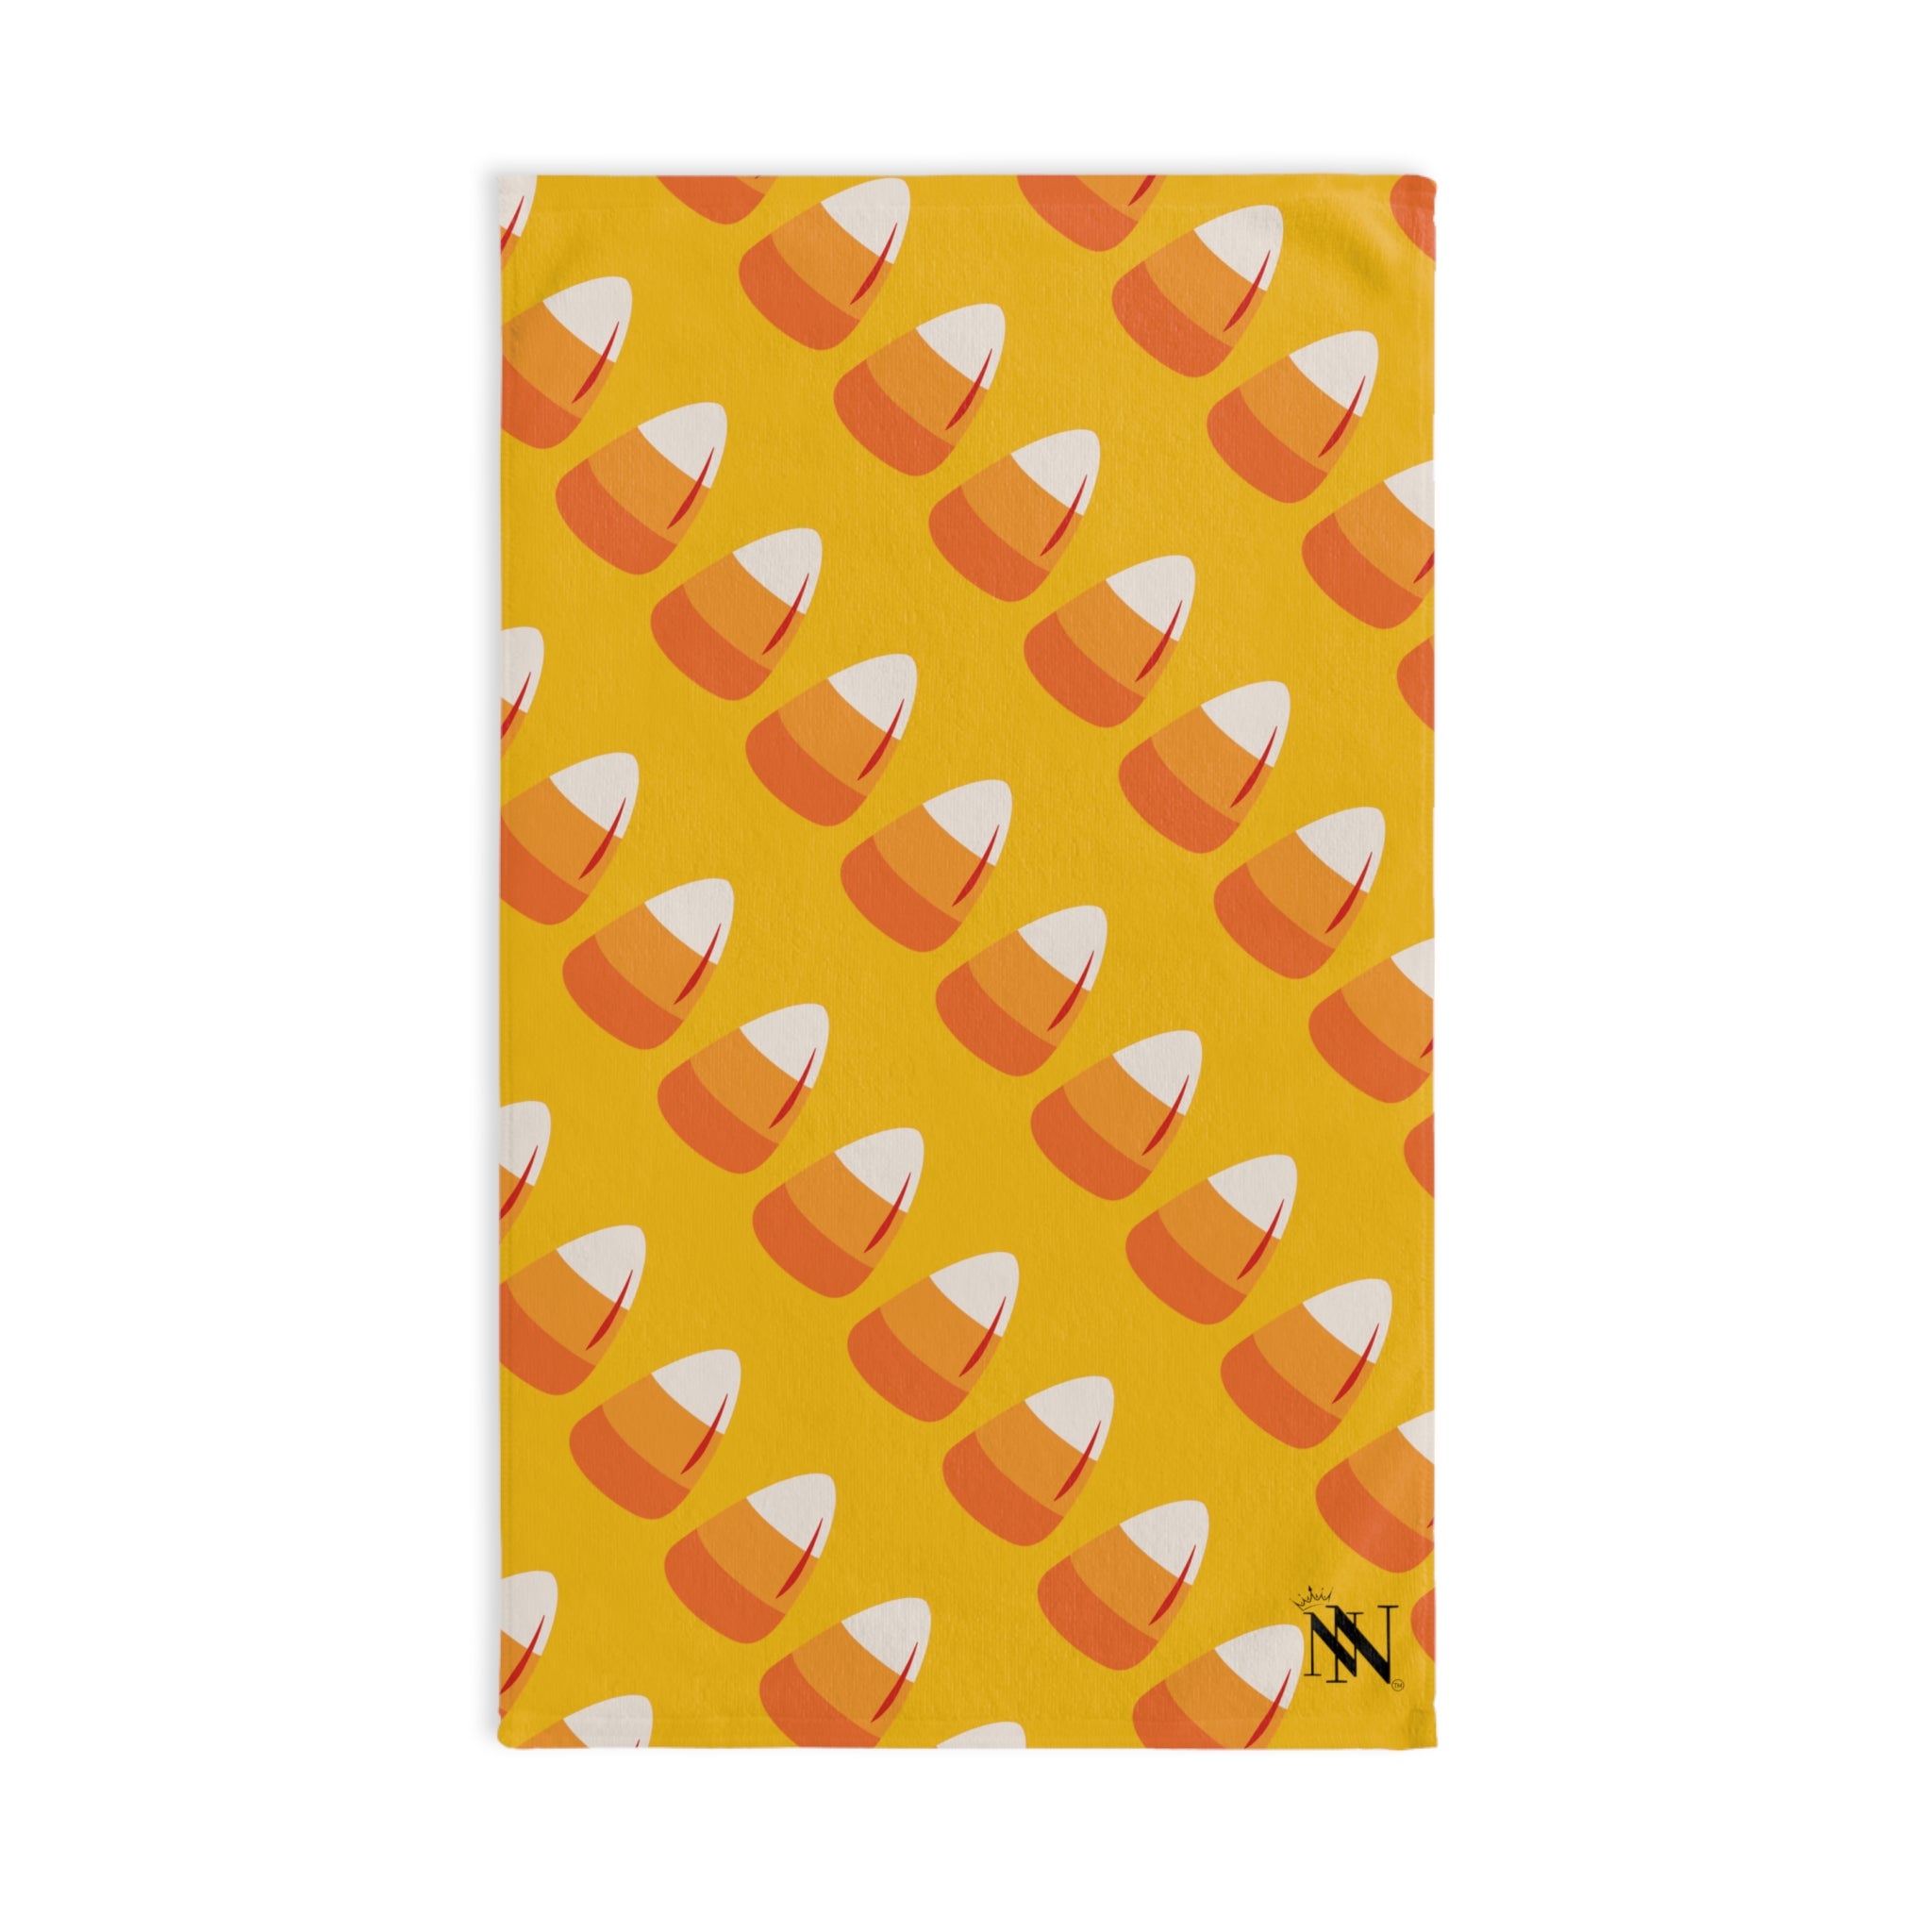 Candy Corn Yellow | Funny Gifts for Men - Gifts for Him - Birthday Gifts for Men, Him, Husband, Boyfriend, New Couple Gifts, Fathers & Valentines Day Gifts, Christmas Gifts NECTAR NAPKINS